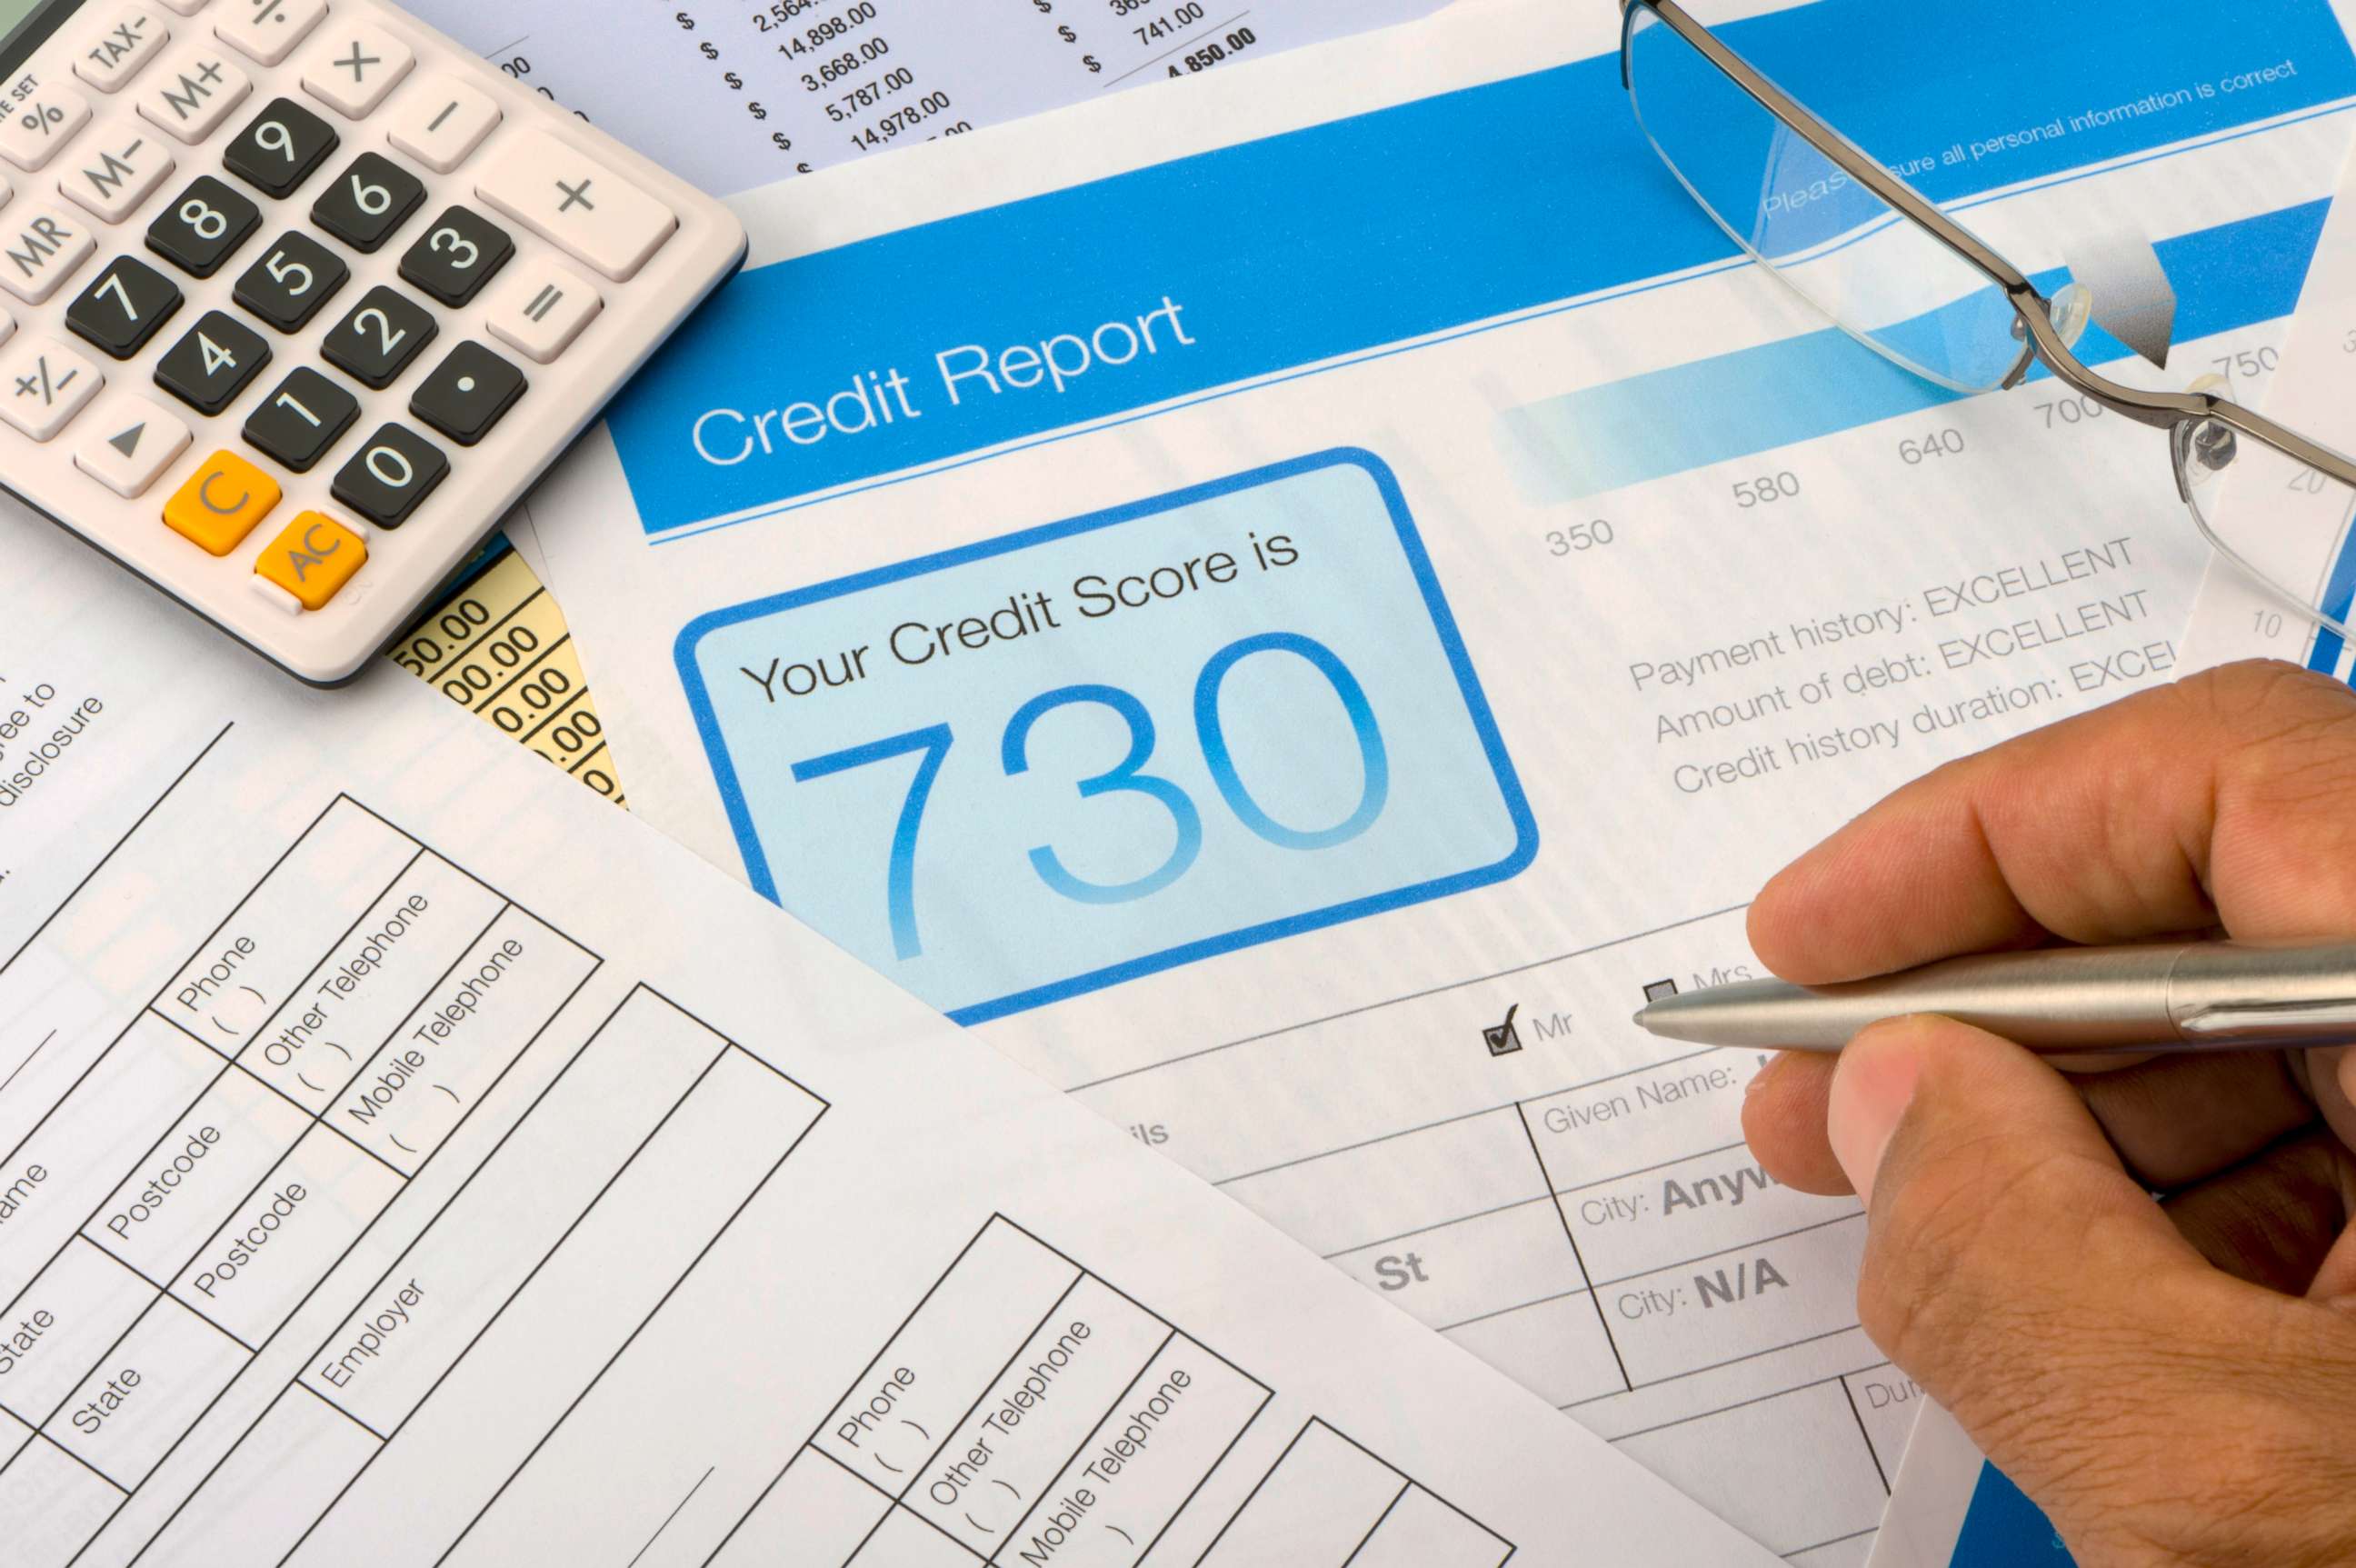 PHOTO: In this undated stock photo, a credit report form on a desk with other paperwork.